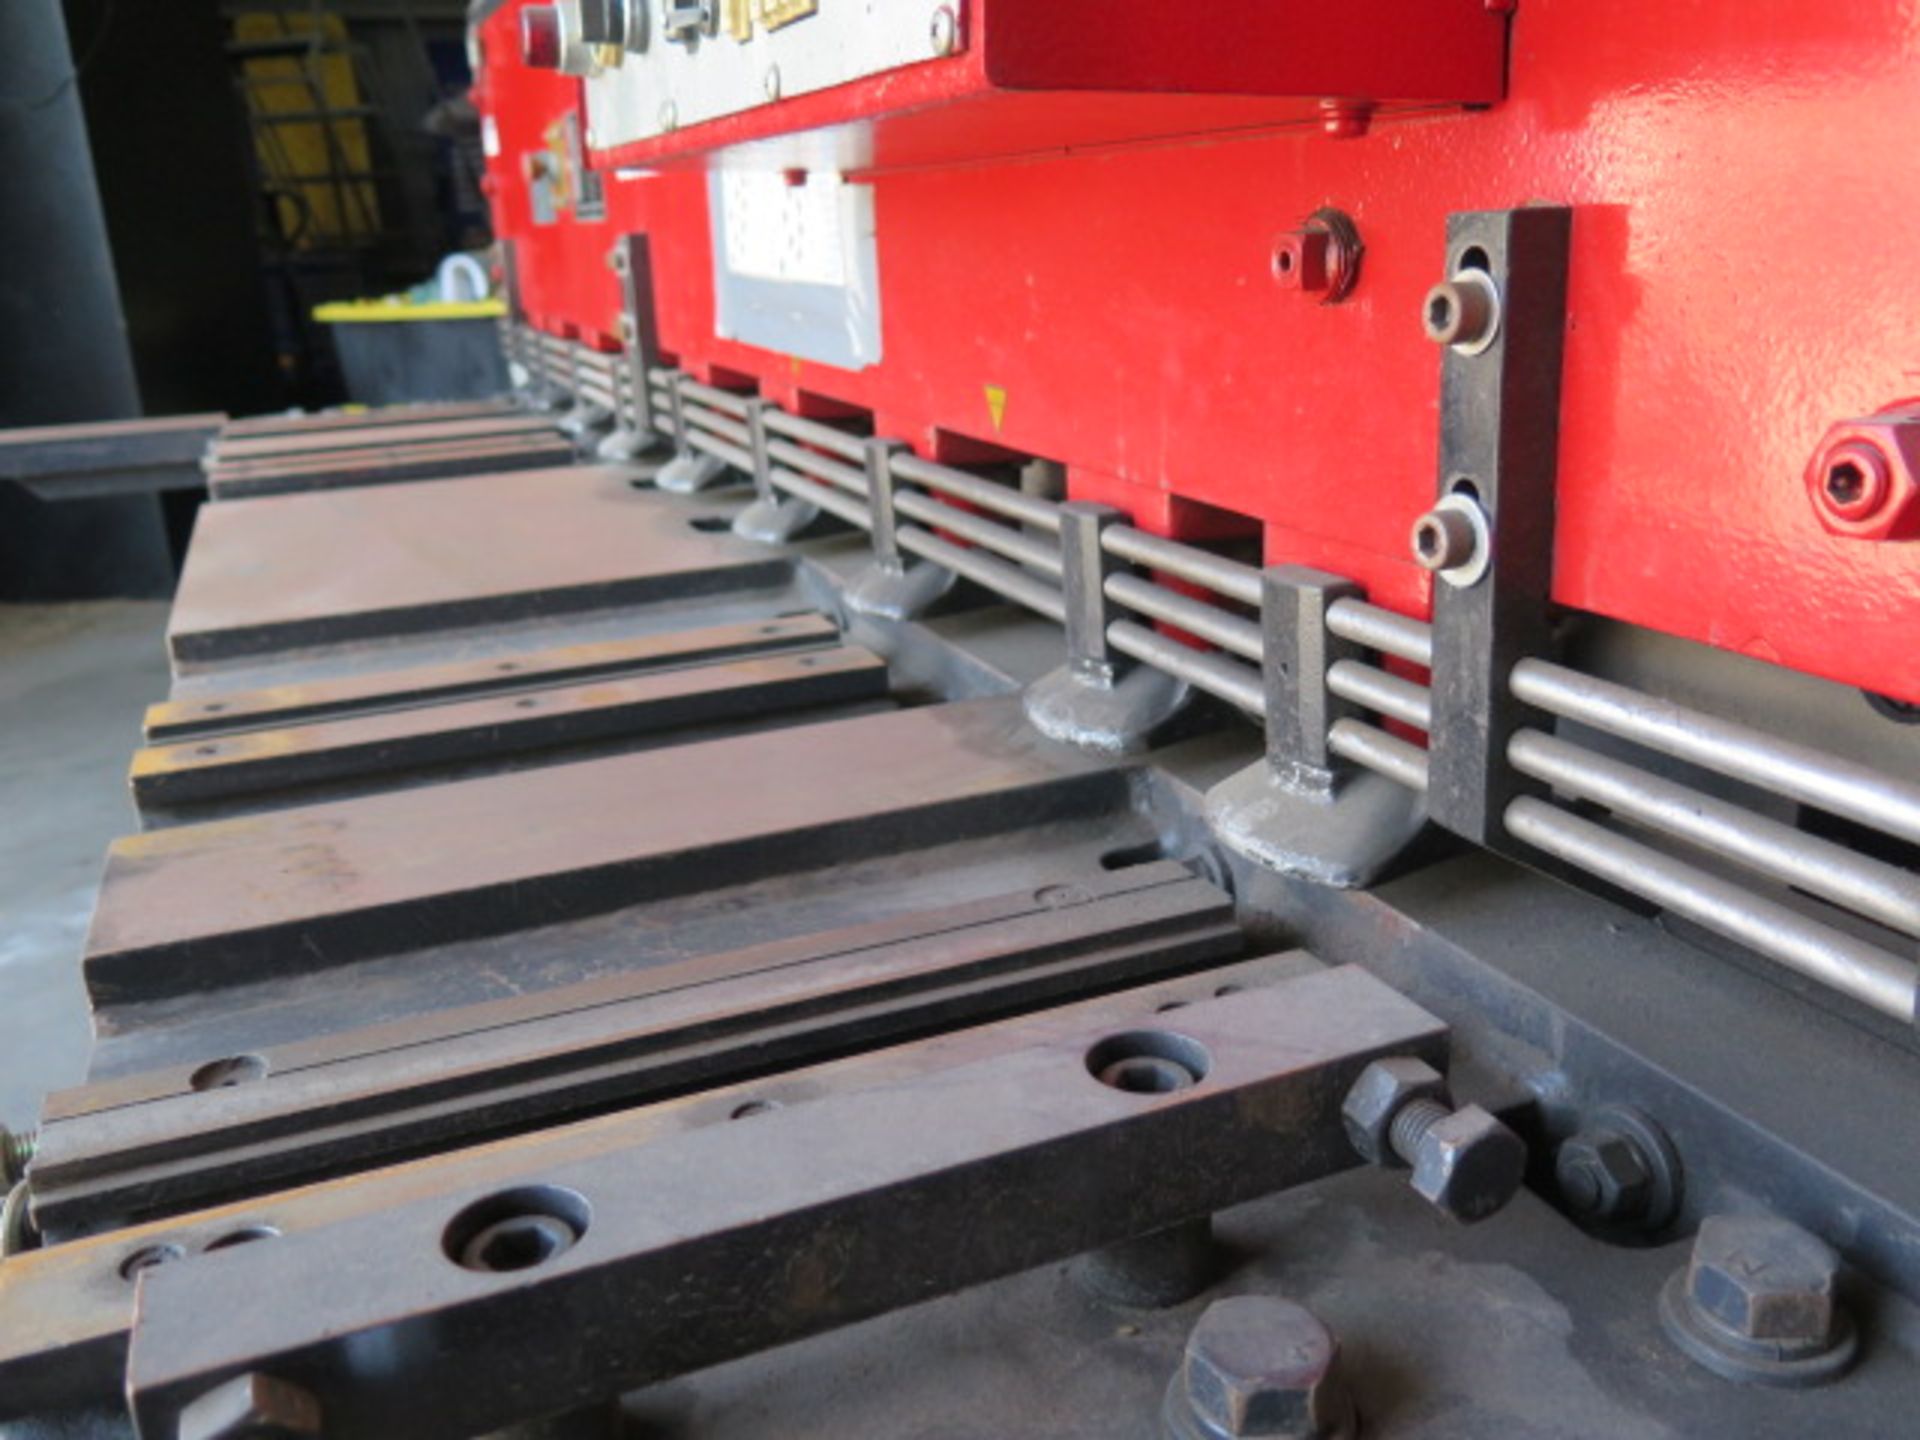 Amada M-2060 ¼” x 78” Power Shear s/n 20600705 w/ Amada Controls and BG, 88” Sq Arm, SOLD AS IS - Image 4 of 12